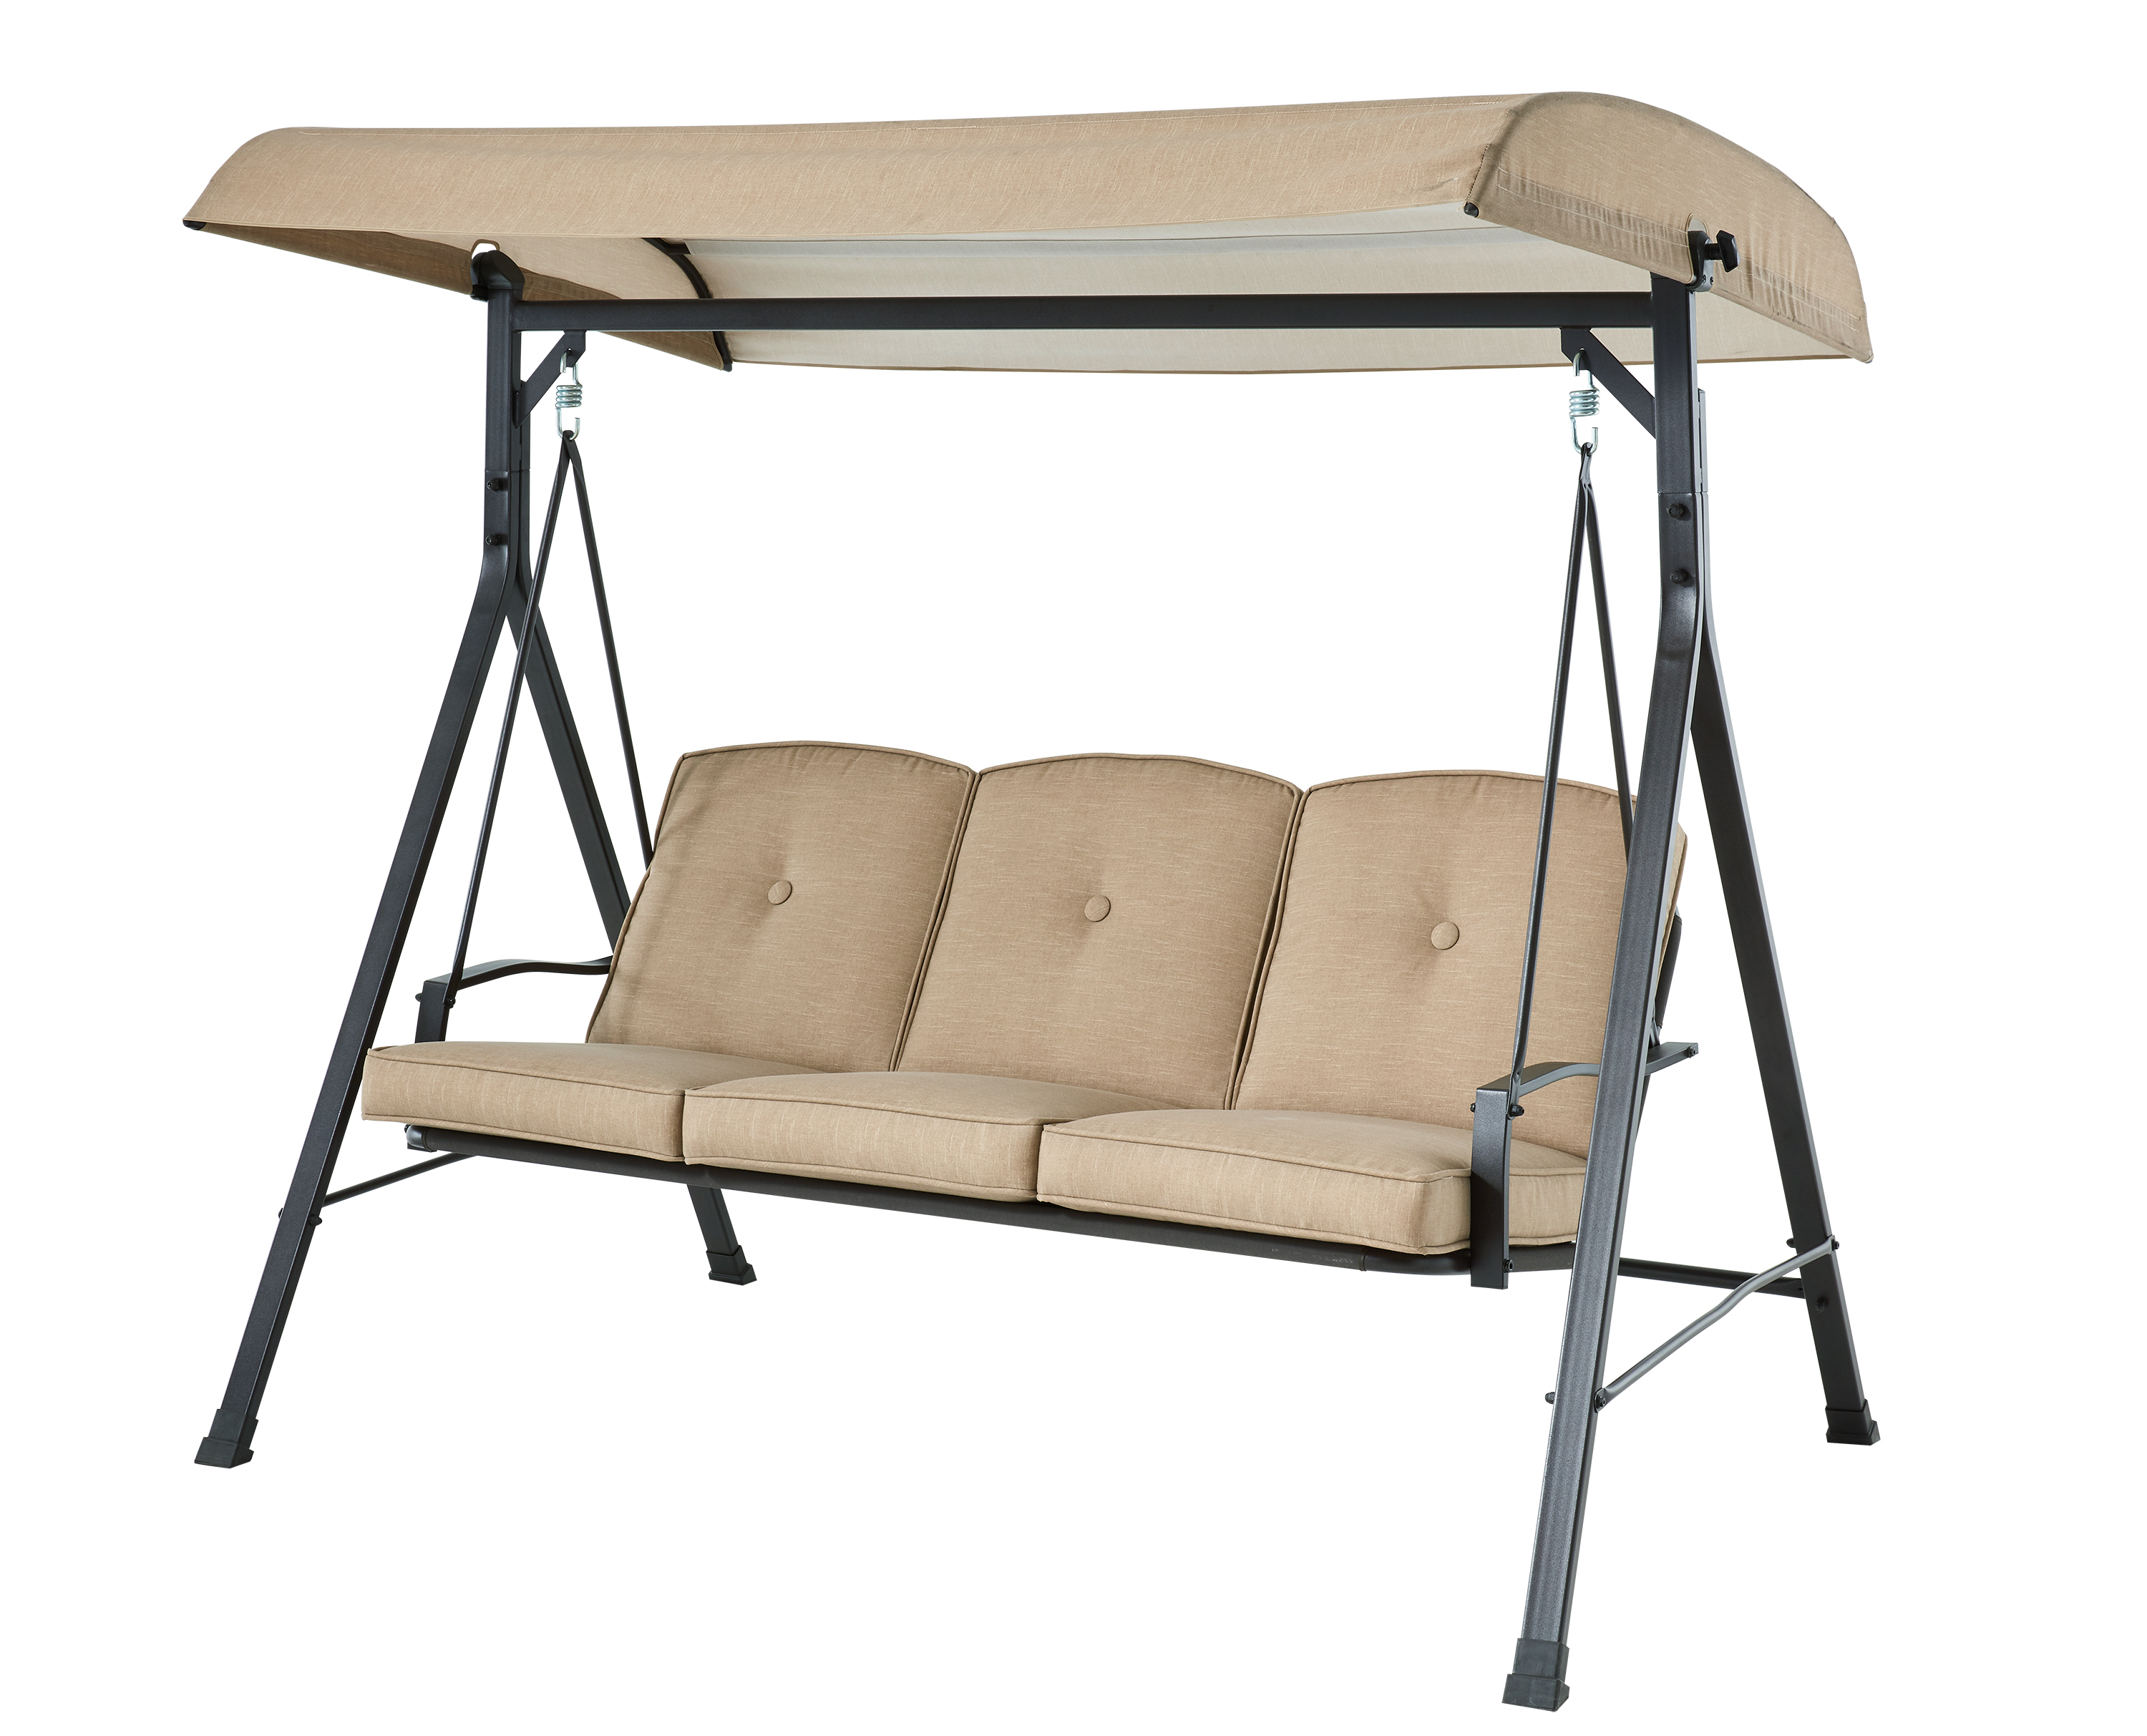 Mainstays Forest Hills 3-Seat Cushion Canopy Porch Swing, Beige - image 2 of 5